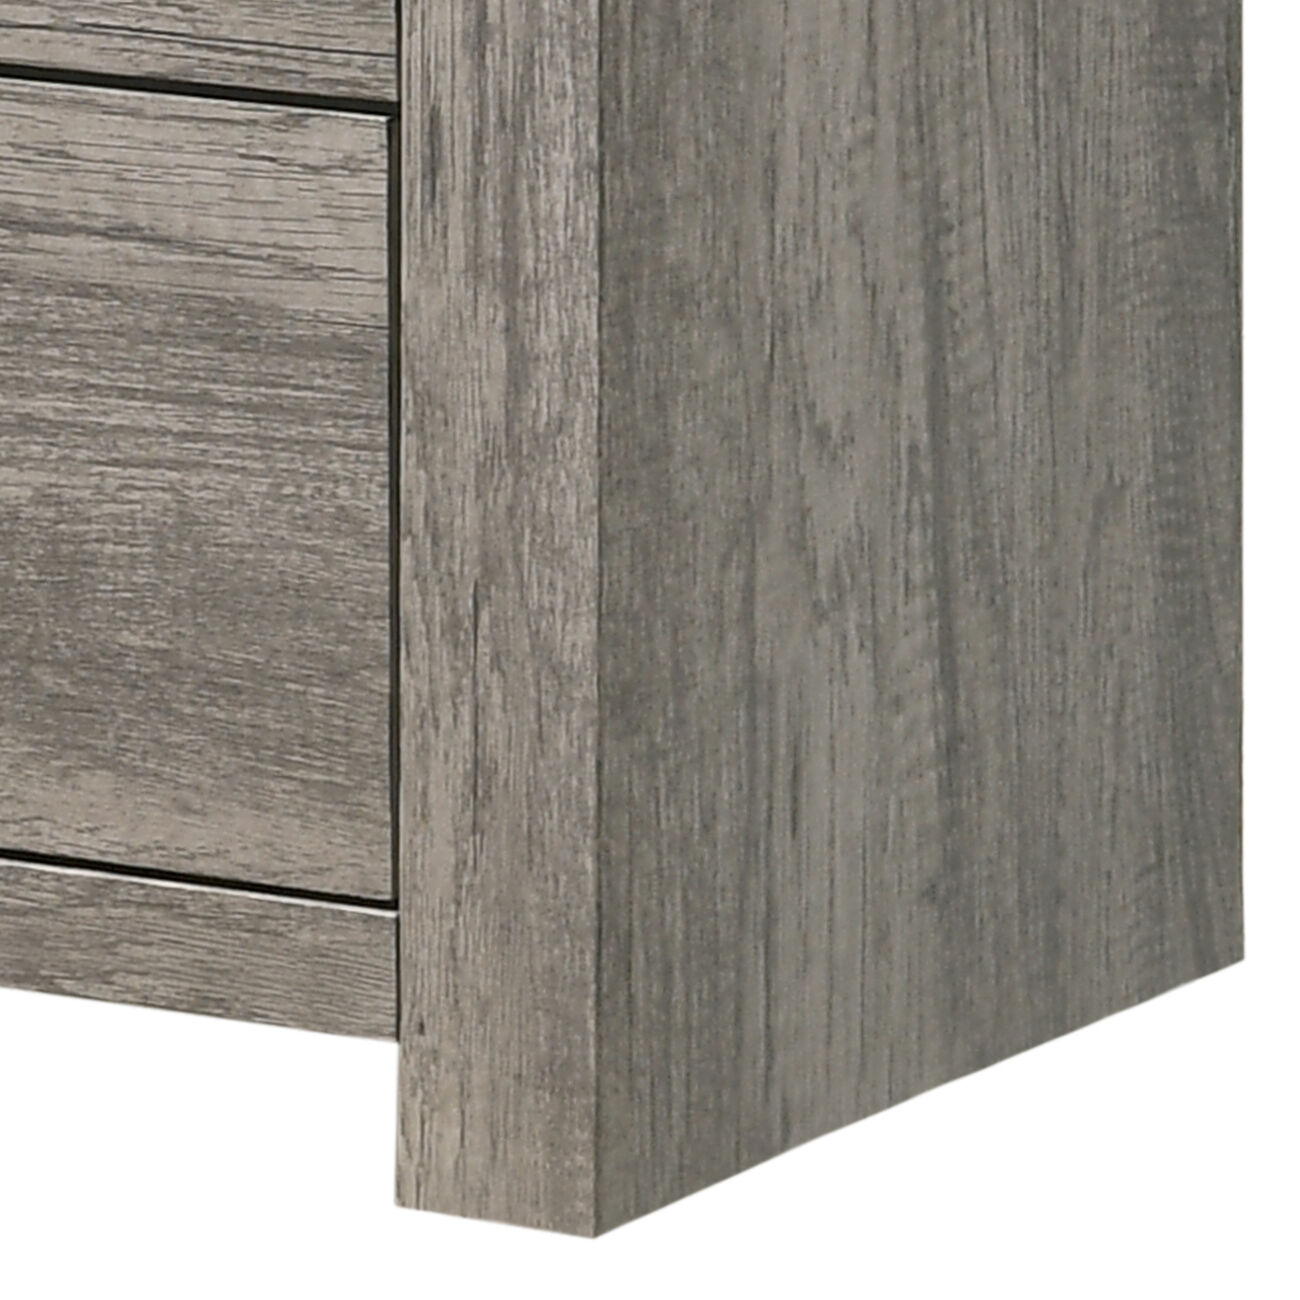 Transitional Style Wooden Dresser with Bar Handles and Grain Details, Gray